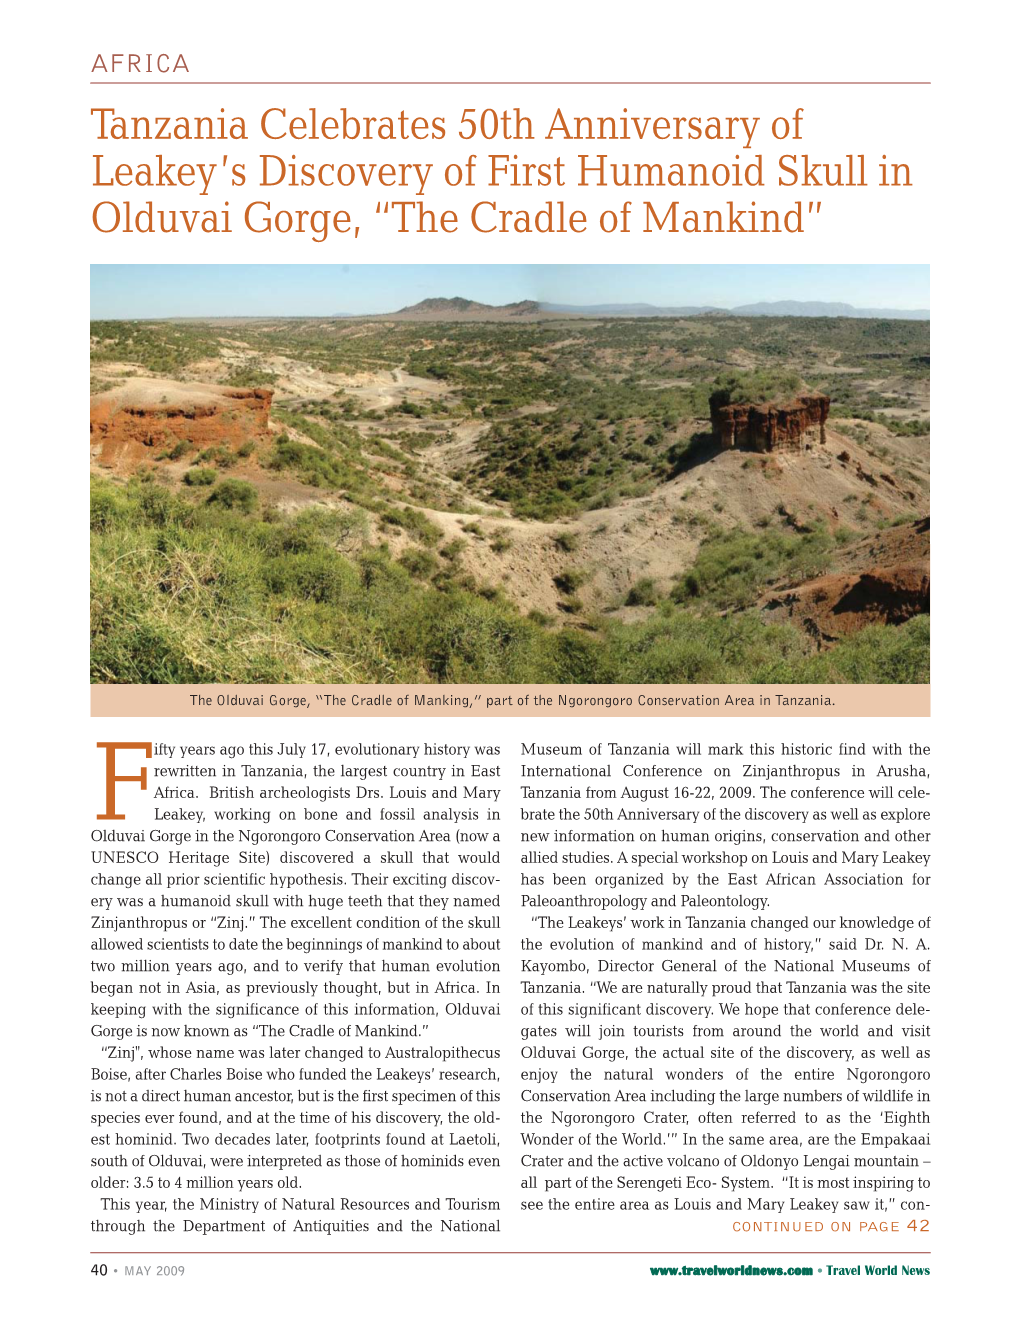 Tanzania Celebrates 50Th Anniversary of Leakey's Discovery of First Humanoid Skull in Olduvai Gorge